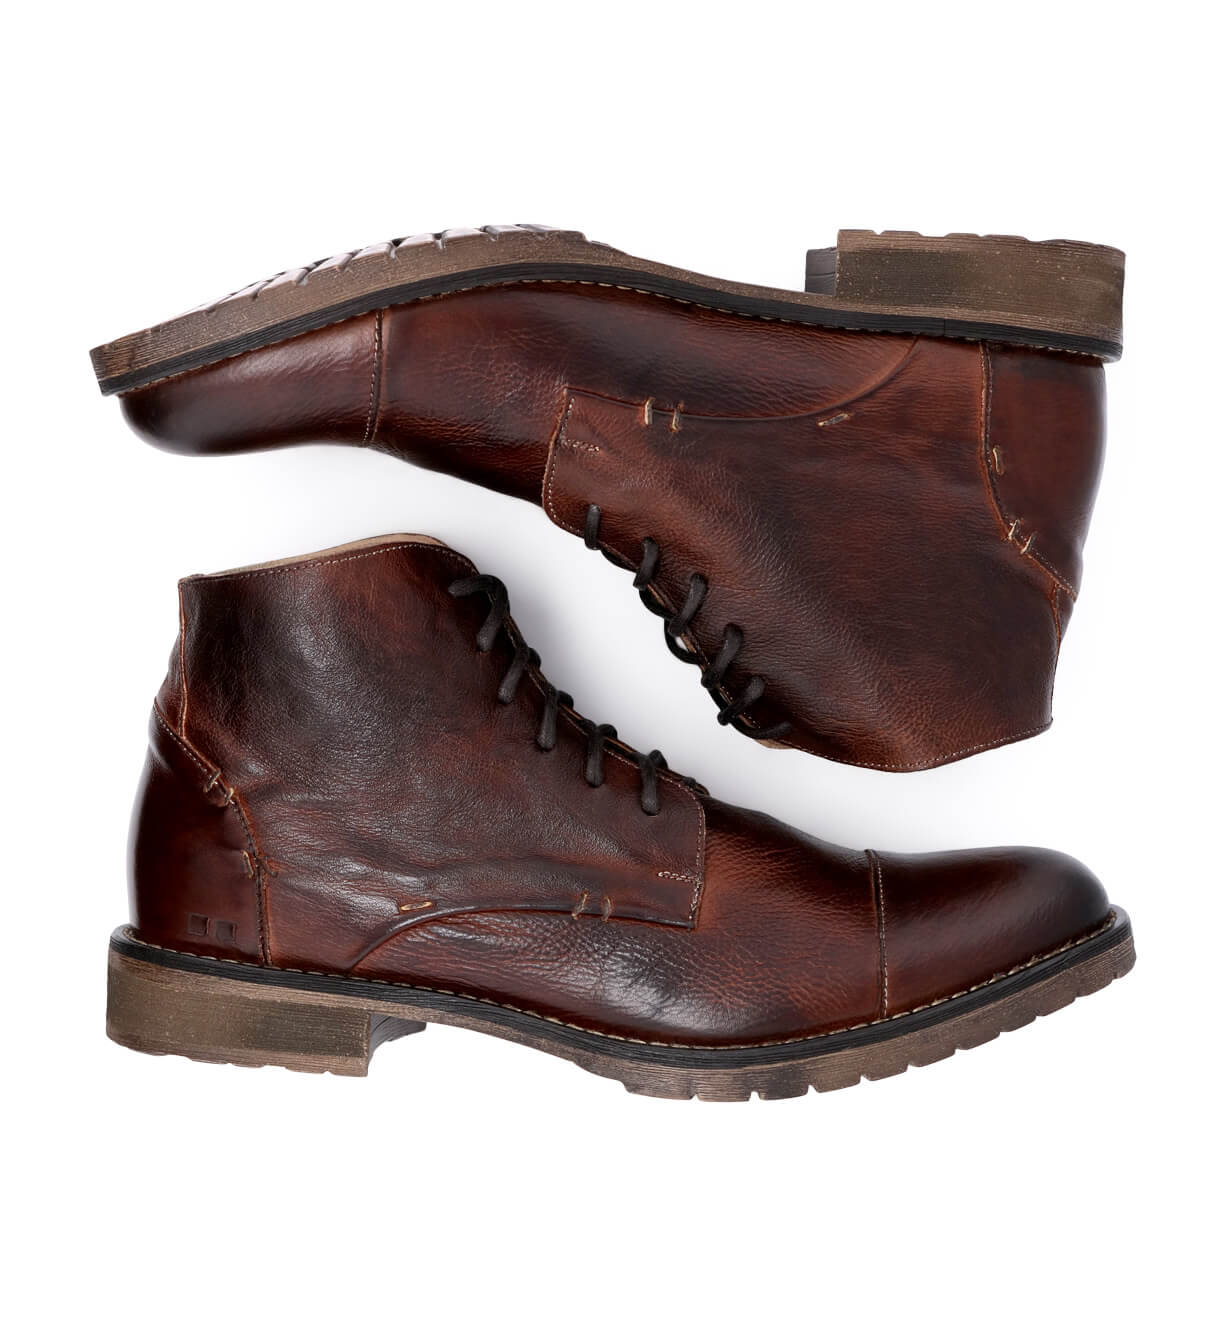 A pair of Bed Stu Dreck brown leather boots on a white background.